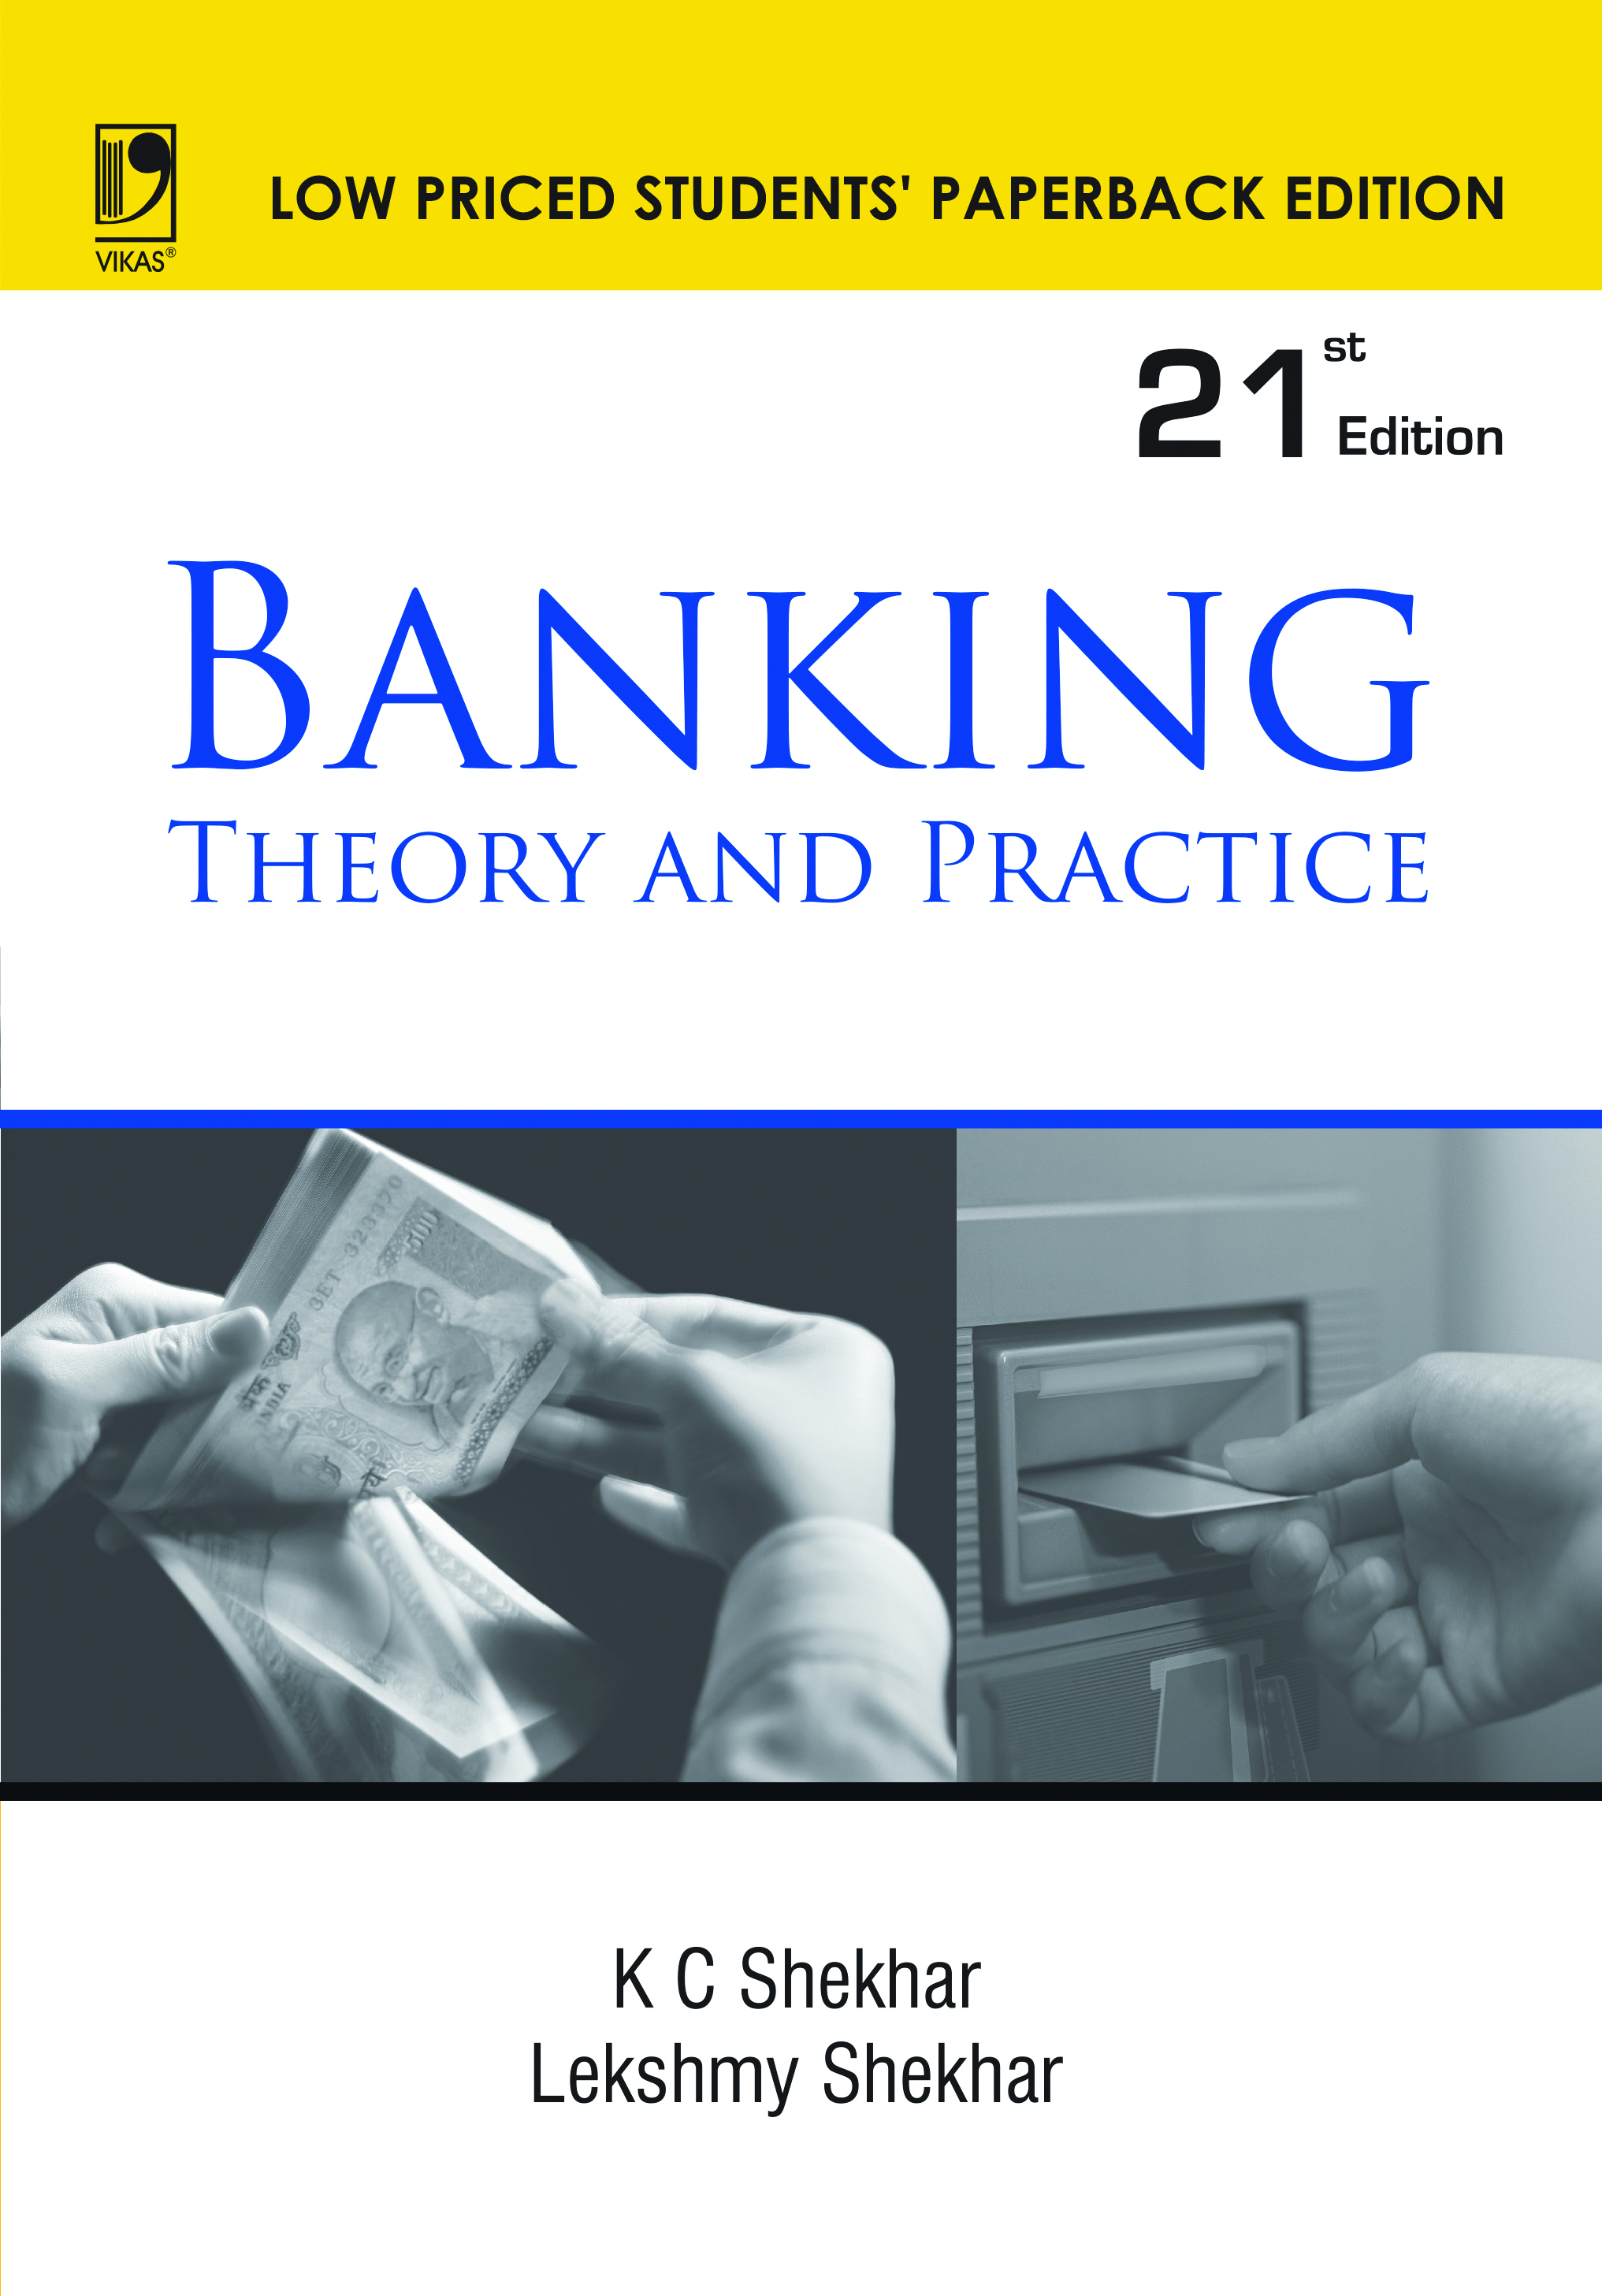 Banking Theory and Practice (LPSPE)